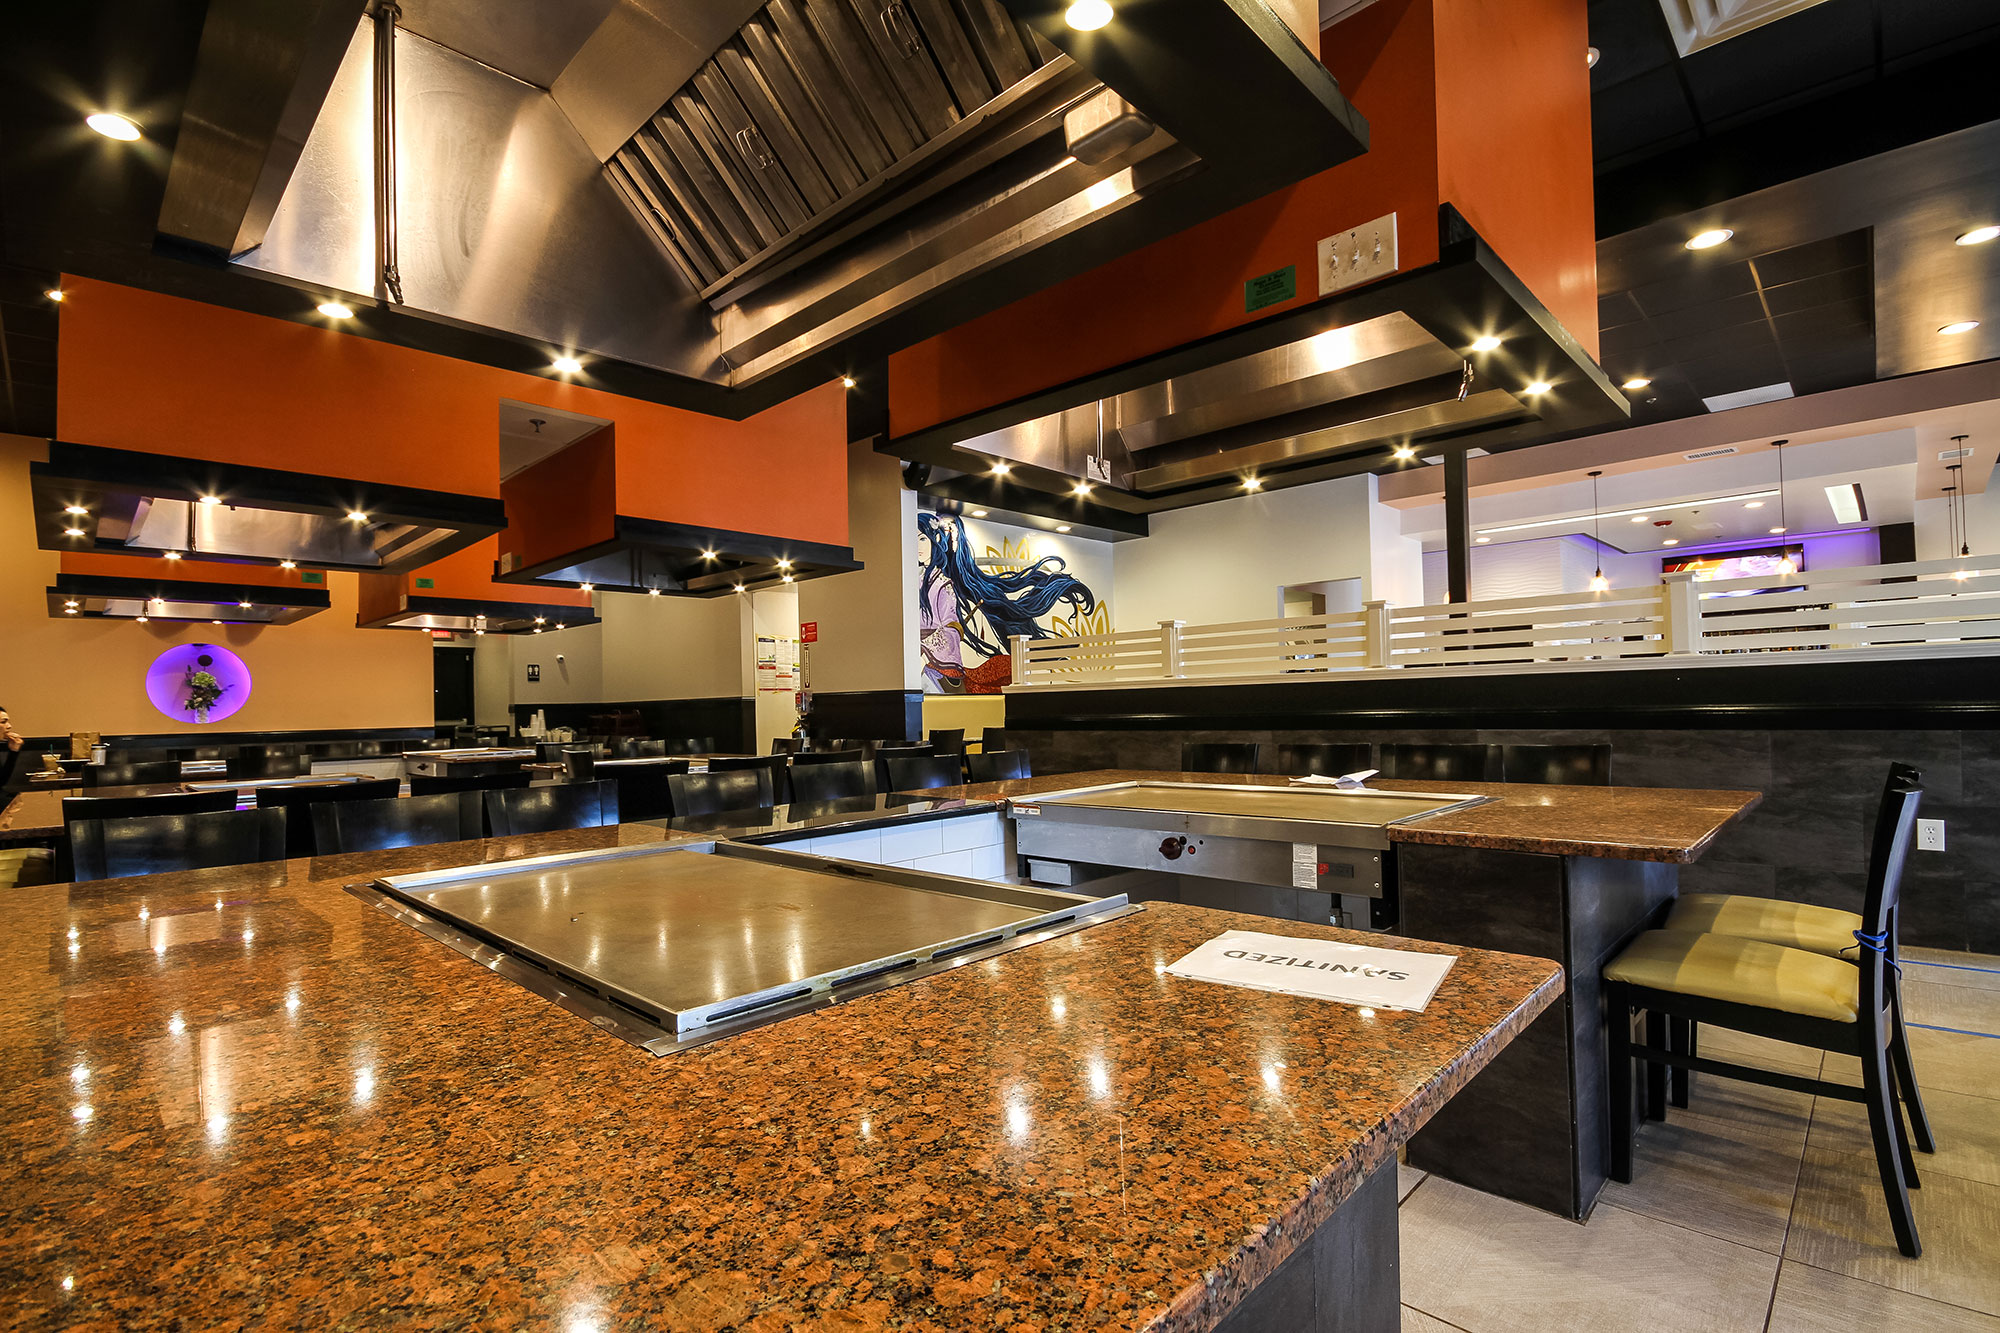 Best hibachi and fun atmosphere for all family